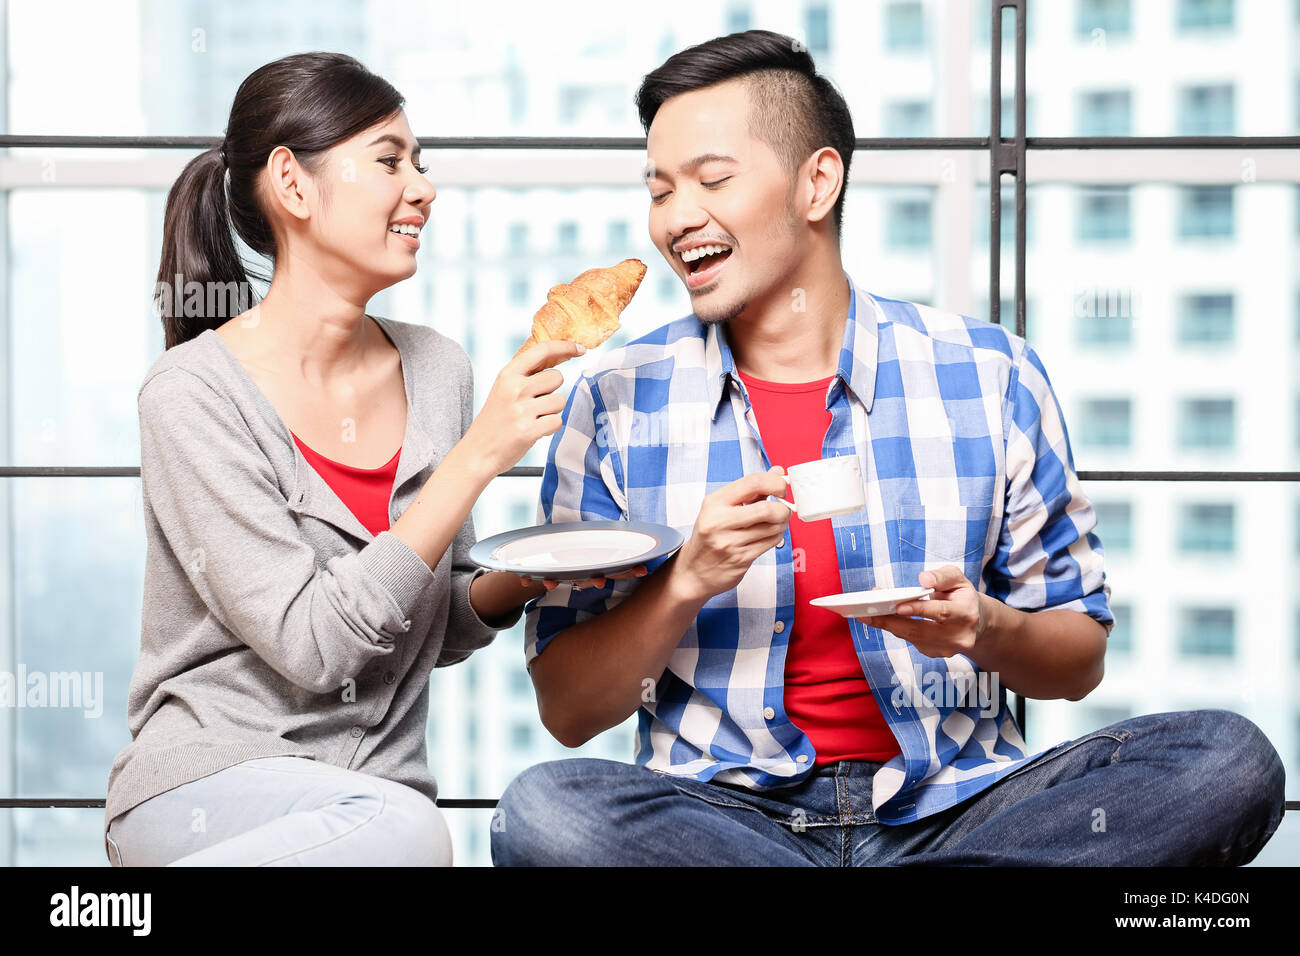 Young Asian Woman having breakfast together Banque D'Images